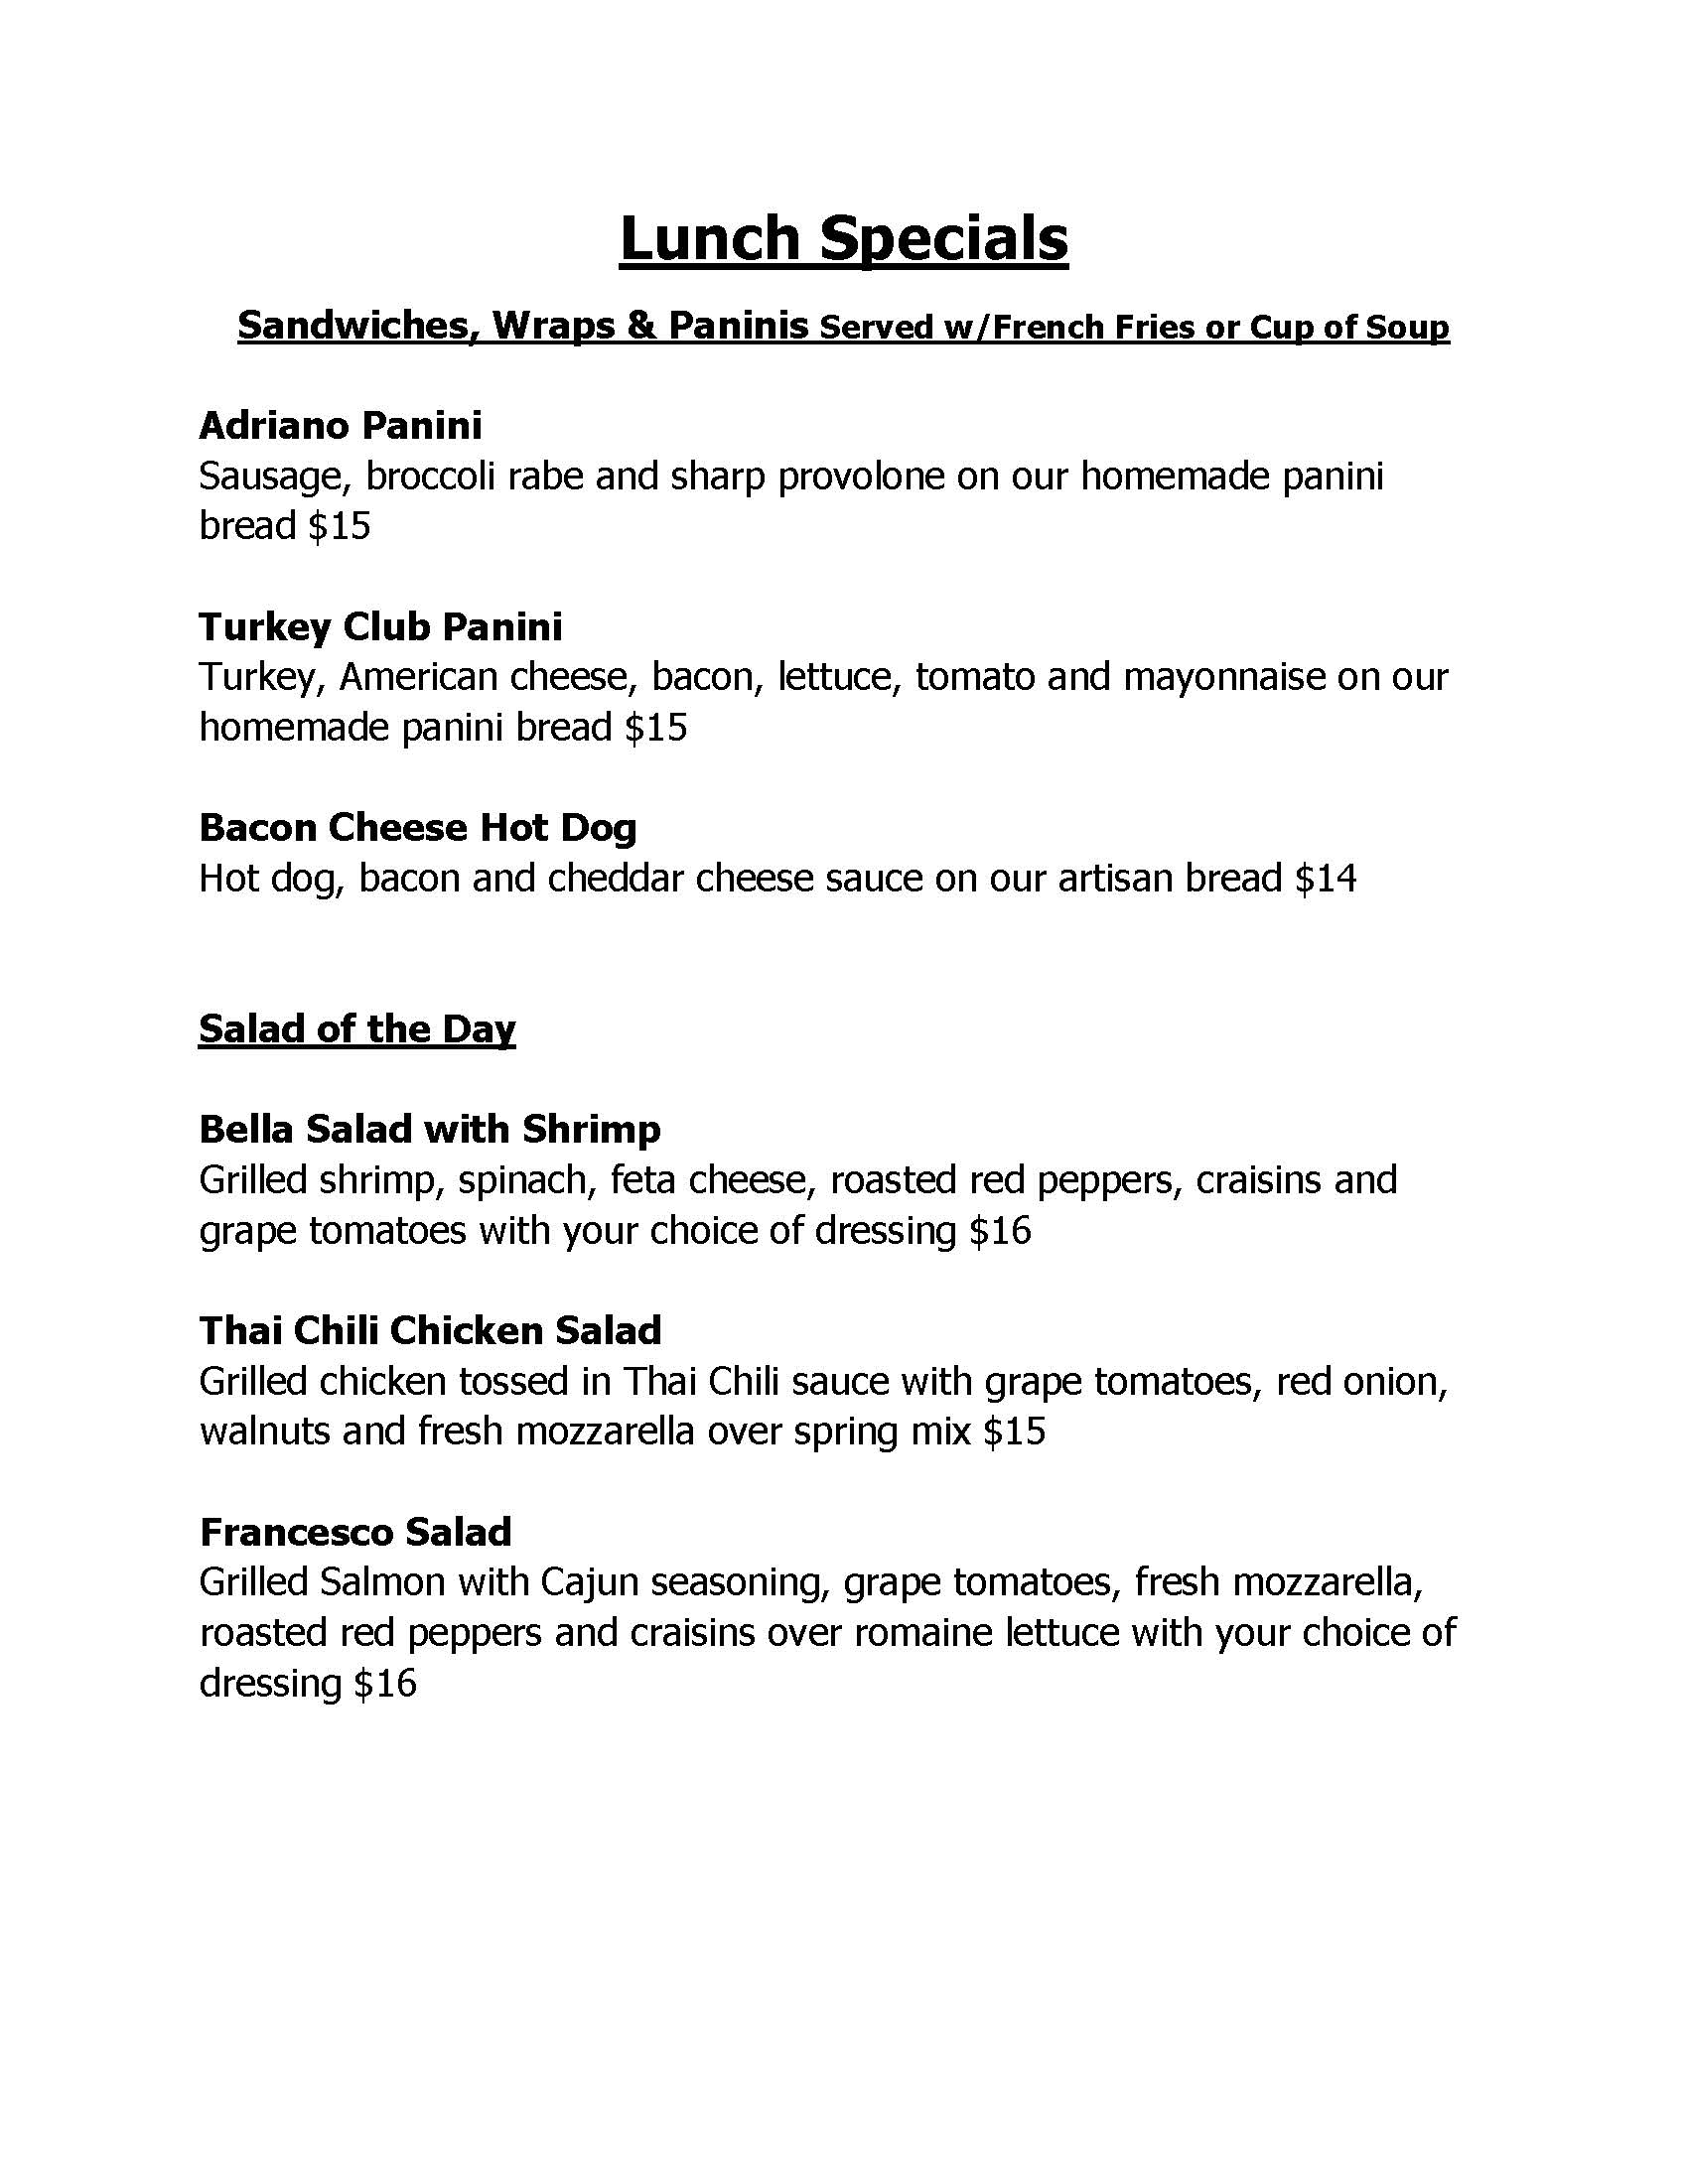 Lunch Specials menu featuring sandwiches, wraps, paninis, and salads. Options include Adriano Panini, Turkey Club Panini, Bacon Cheese Hot Dog, Bella Salad with Shrimp, Thai Chili Chicken Salad, and Francesco Salad. Prices range from $14 to $16.